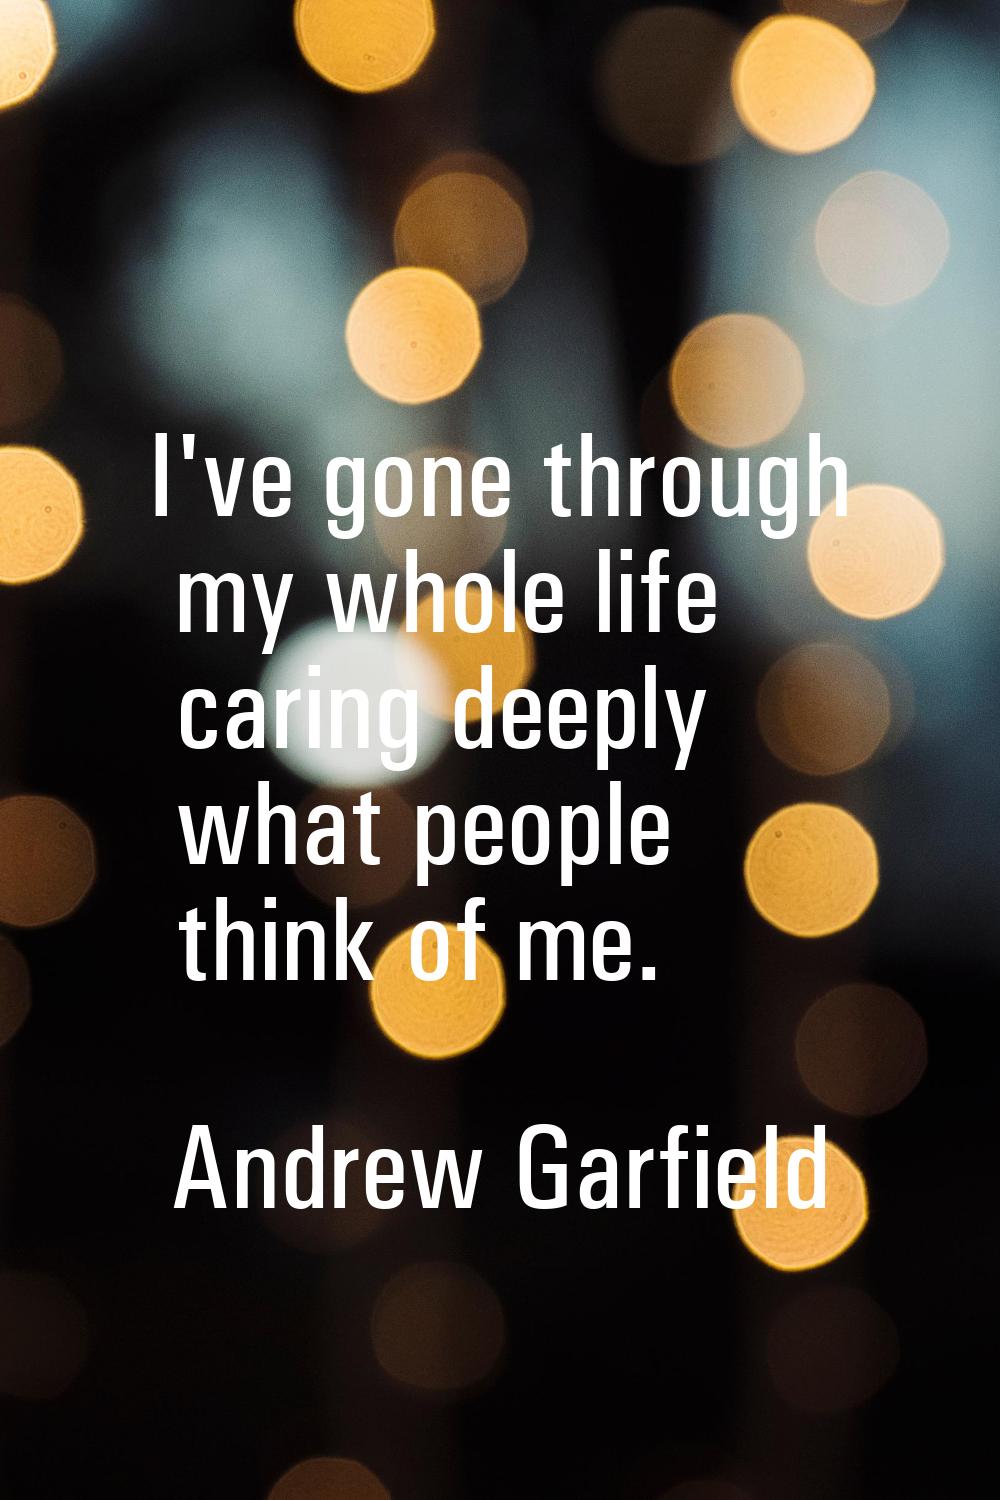 I've gone through my whole life caring deeply what people think of me.